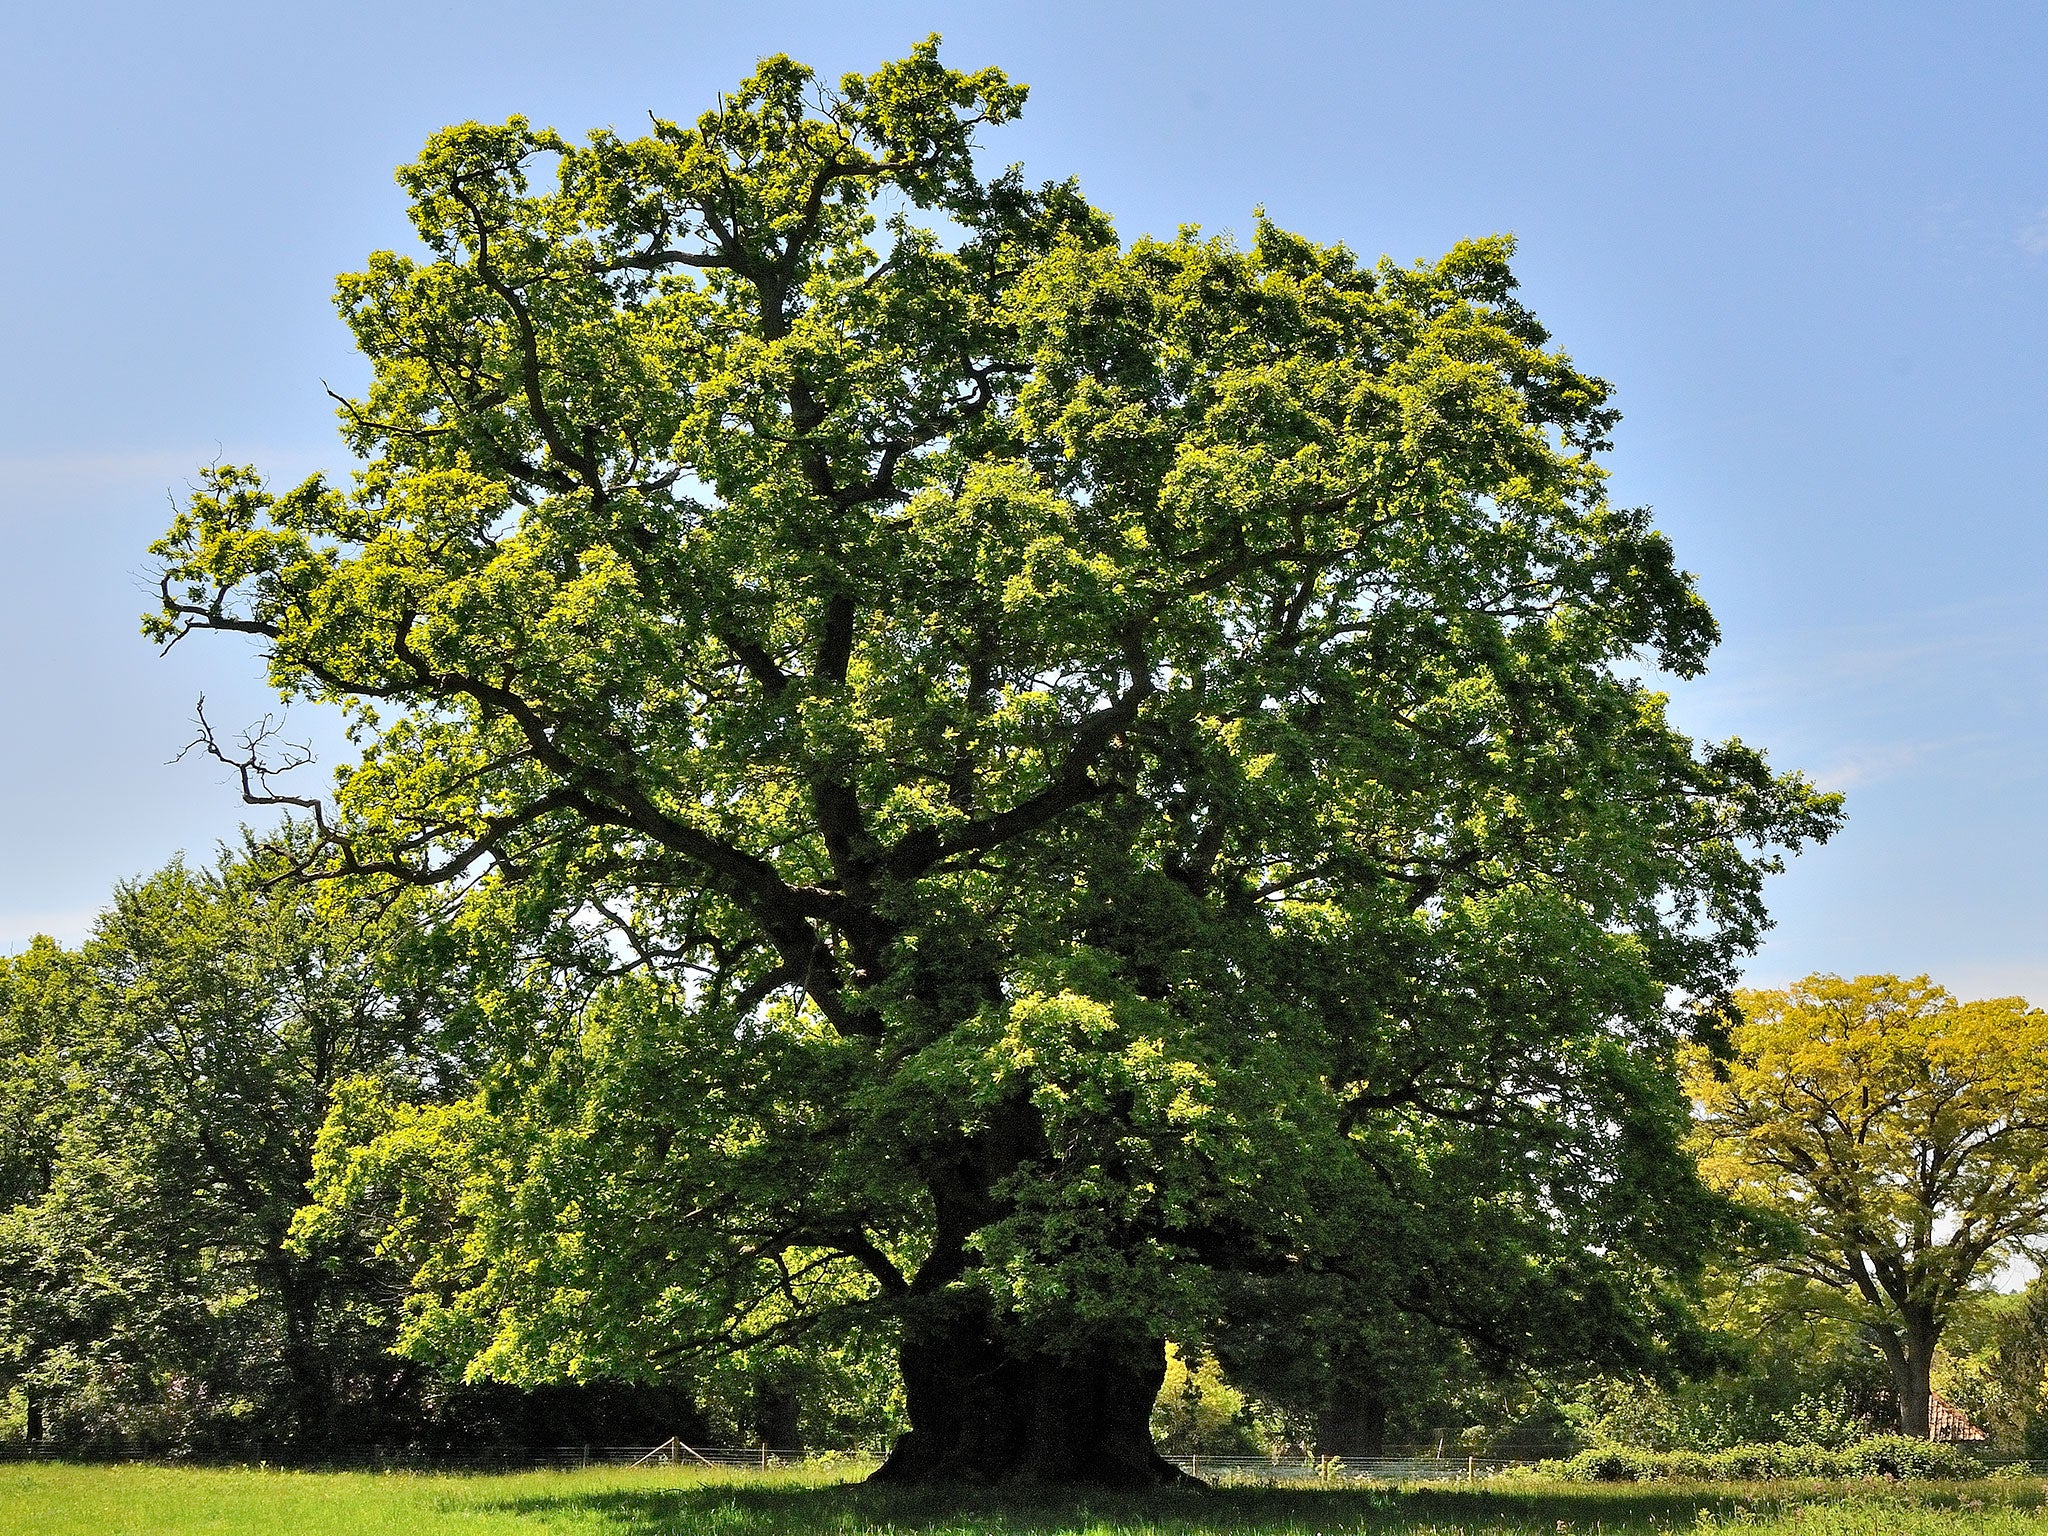 This 850-year-old ancient oak at King’s Walden is among 117 examples dating back 800 to 1,000 years